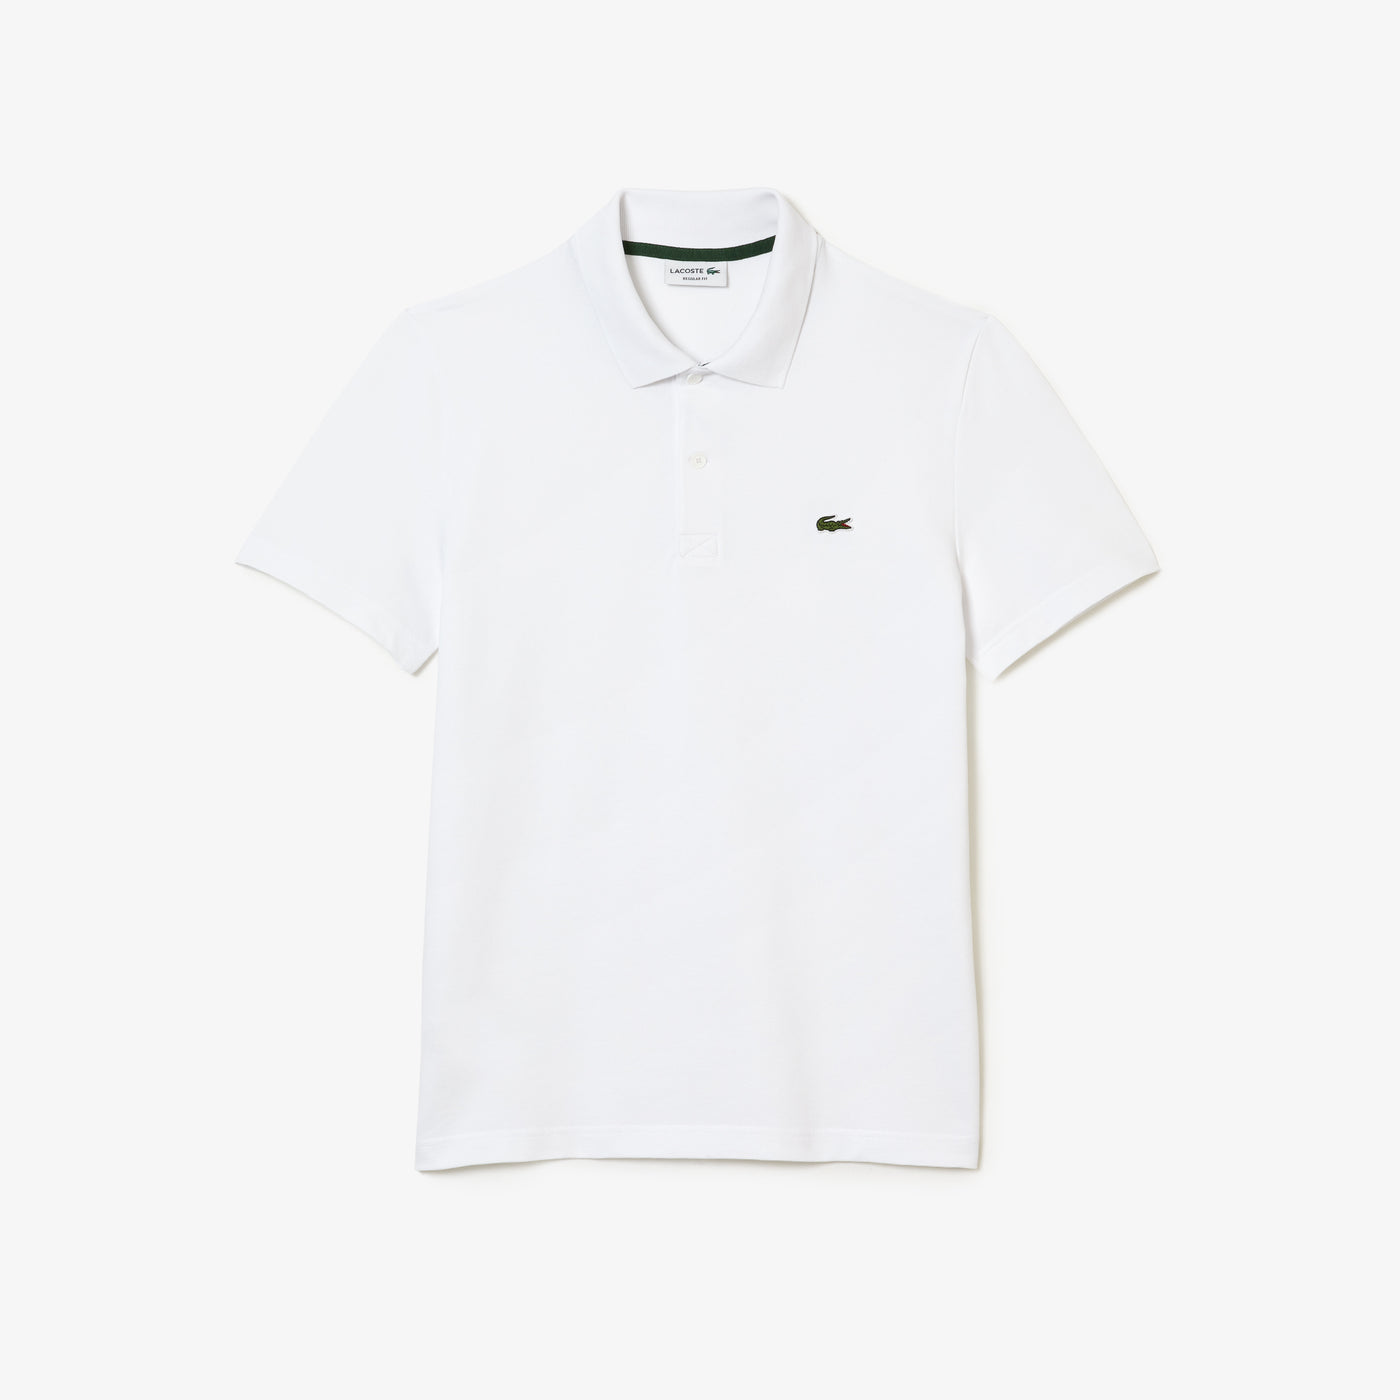 Men's Lacoste Regular Fit Stretch Organic Cotton Polo - DH0783